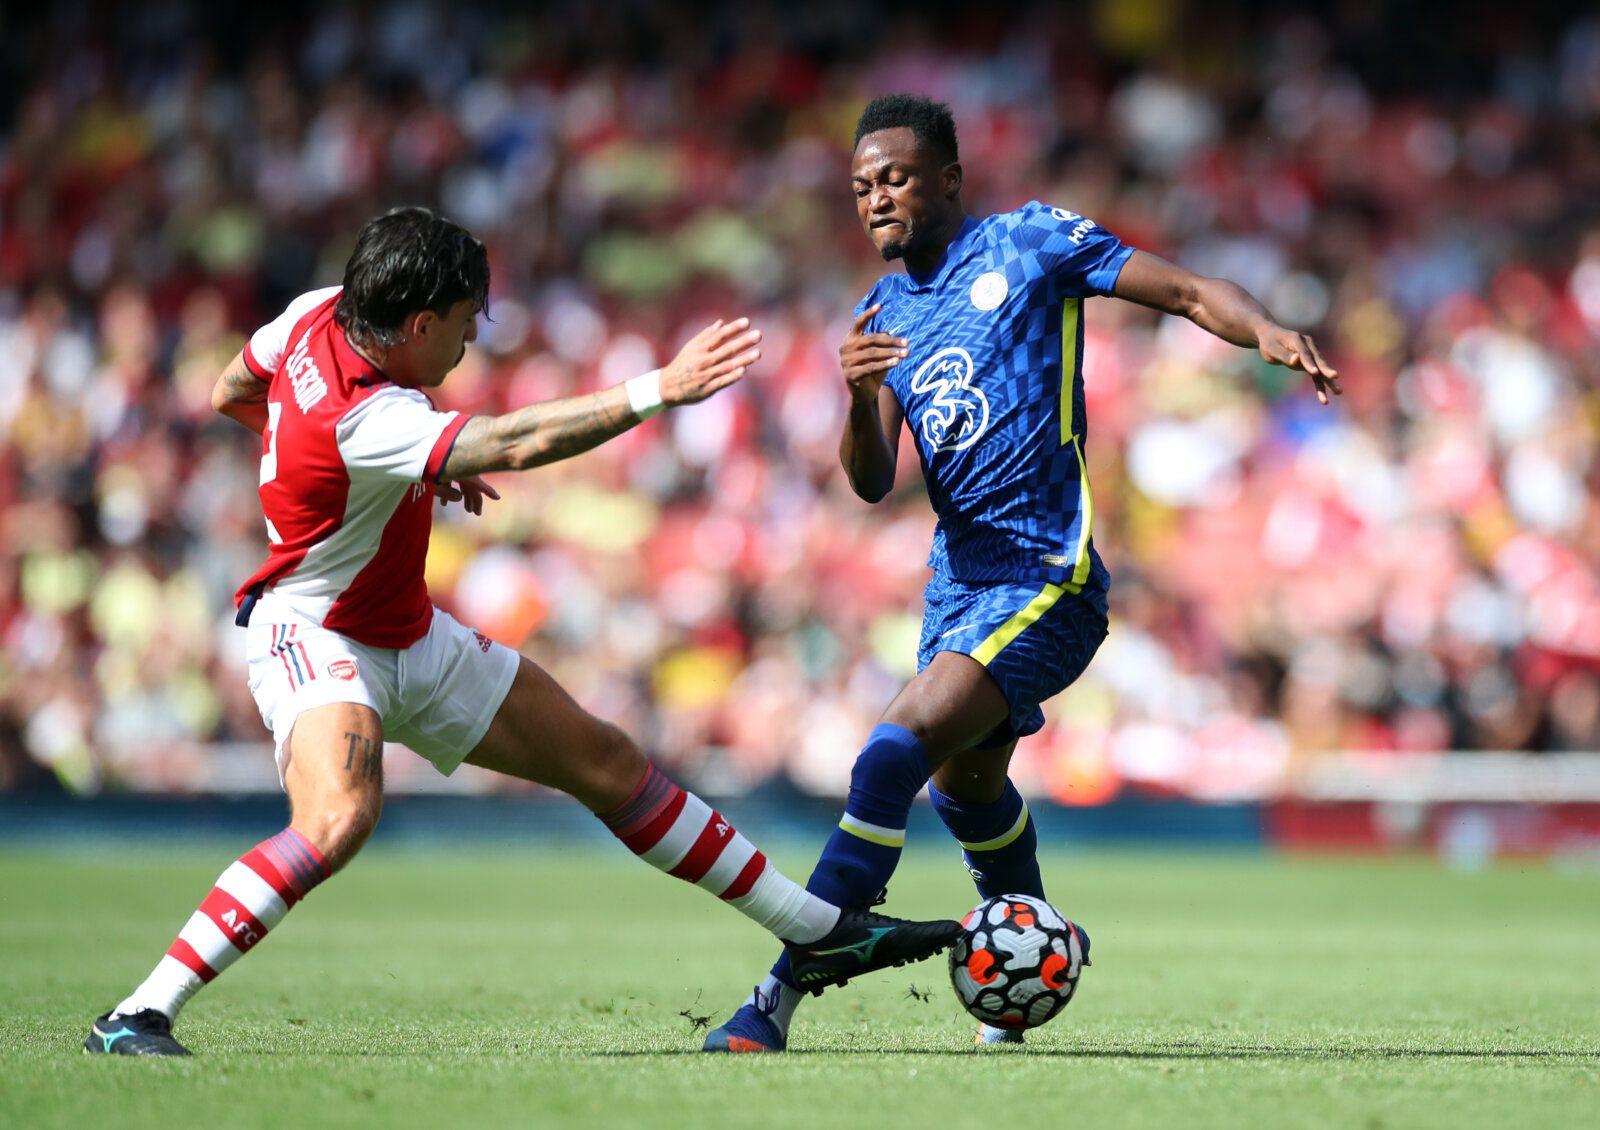 Soccer Football - Pre Season Friendly - Arsenal v Chelsea - Emirates Stadium, London, Britain - August 1, 2021 Arsenal's Hector Bellerin in action with Chelsea's Baba Rahman Action Images via Reuters/Peter Cziborra